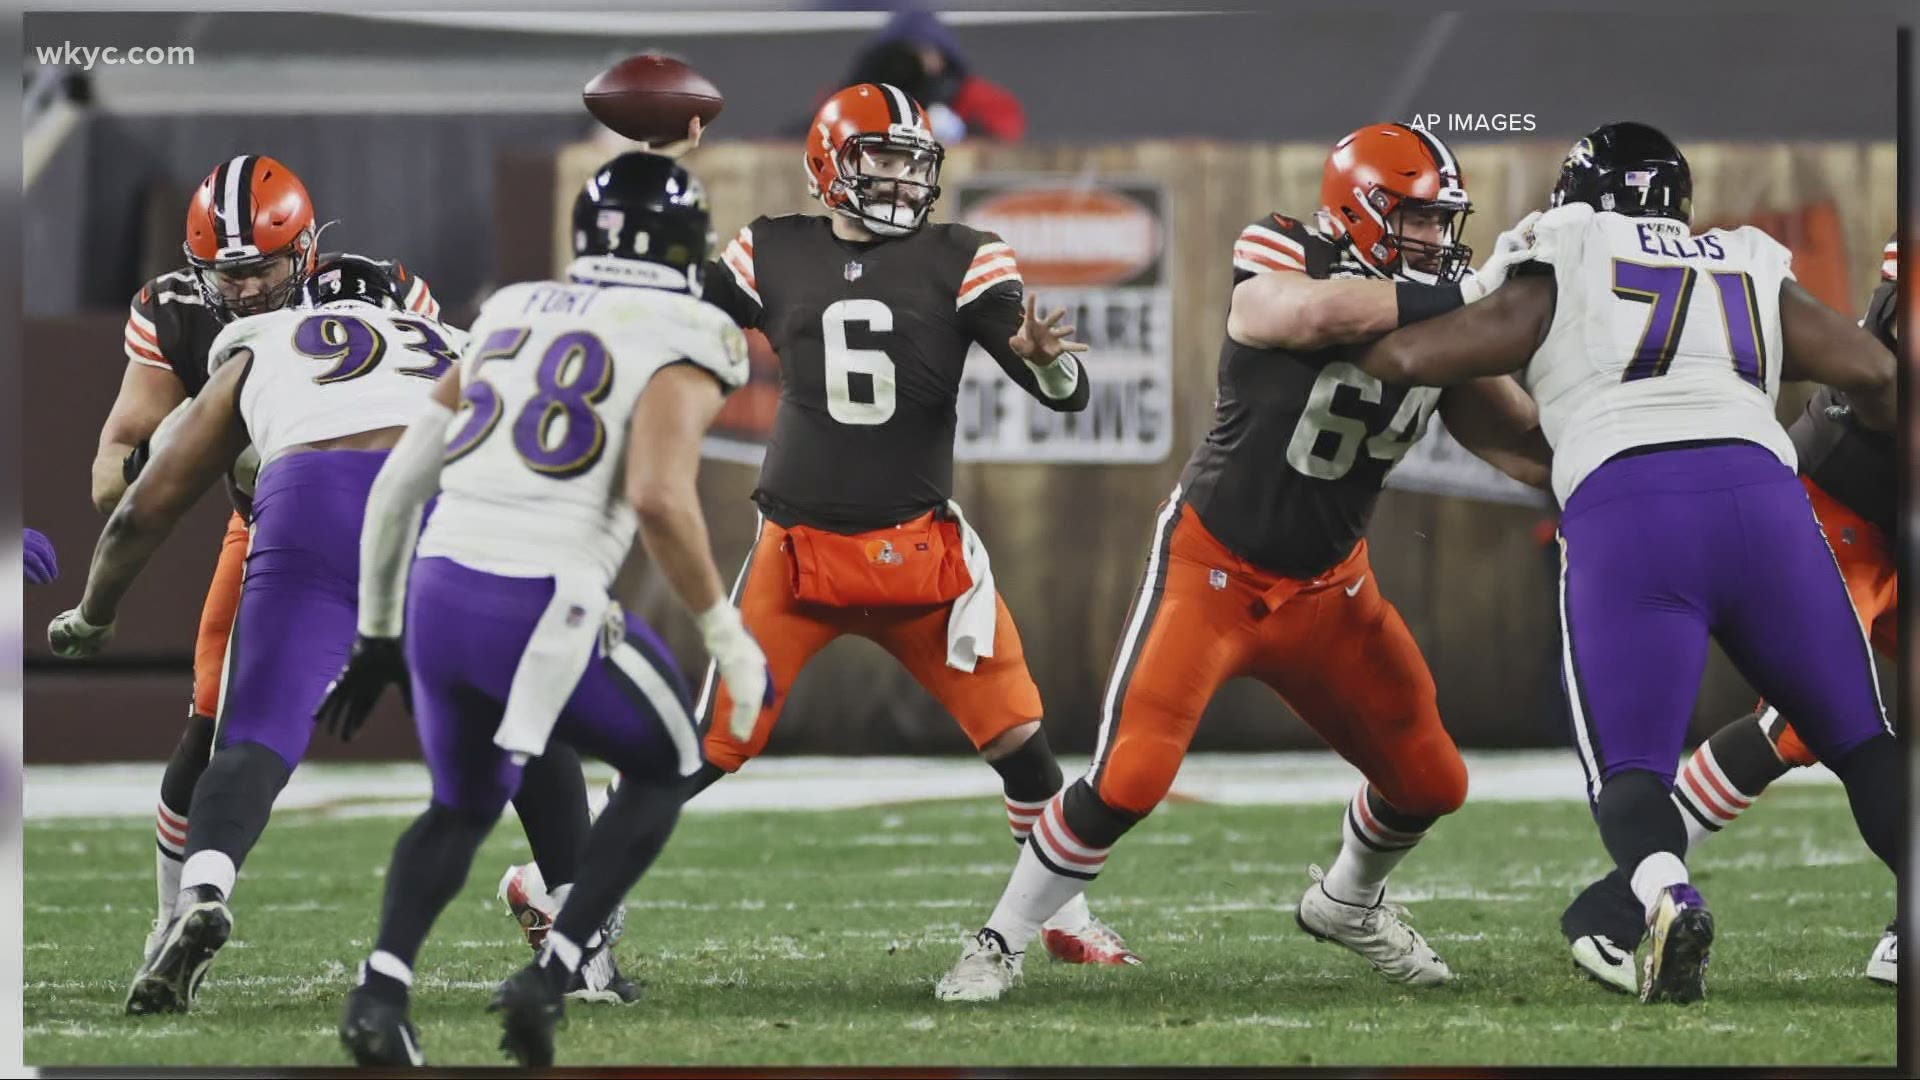 The Browns are 9-4 after Monday night's loss to the Ravens. Jim Donovan opens up the mailbag to answer your questions on Hey Jimmy!